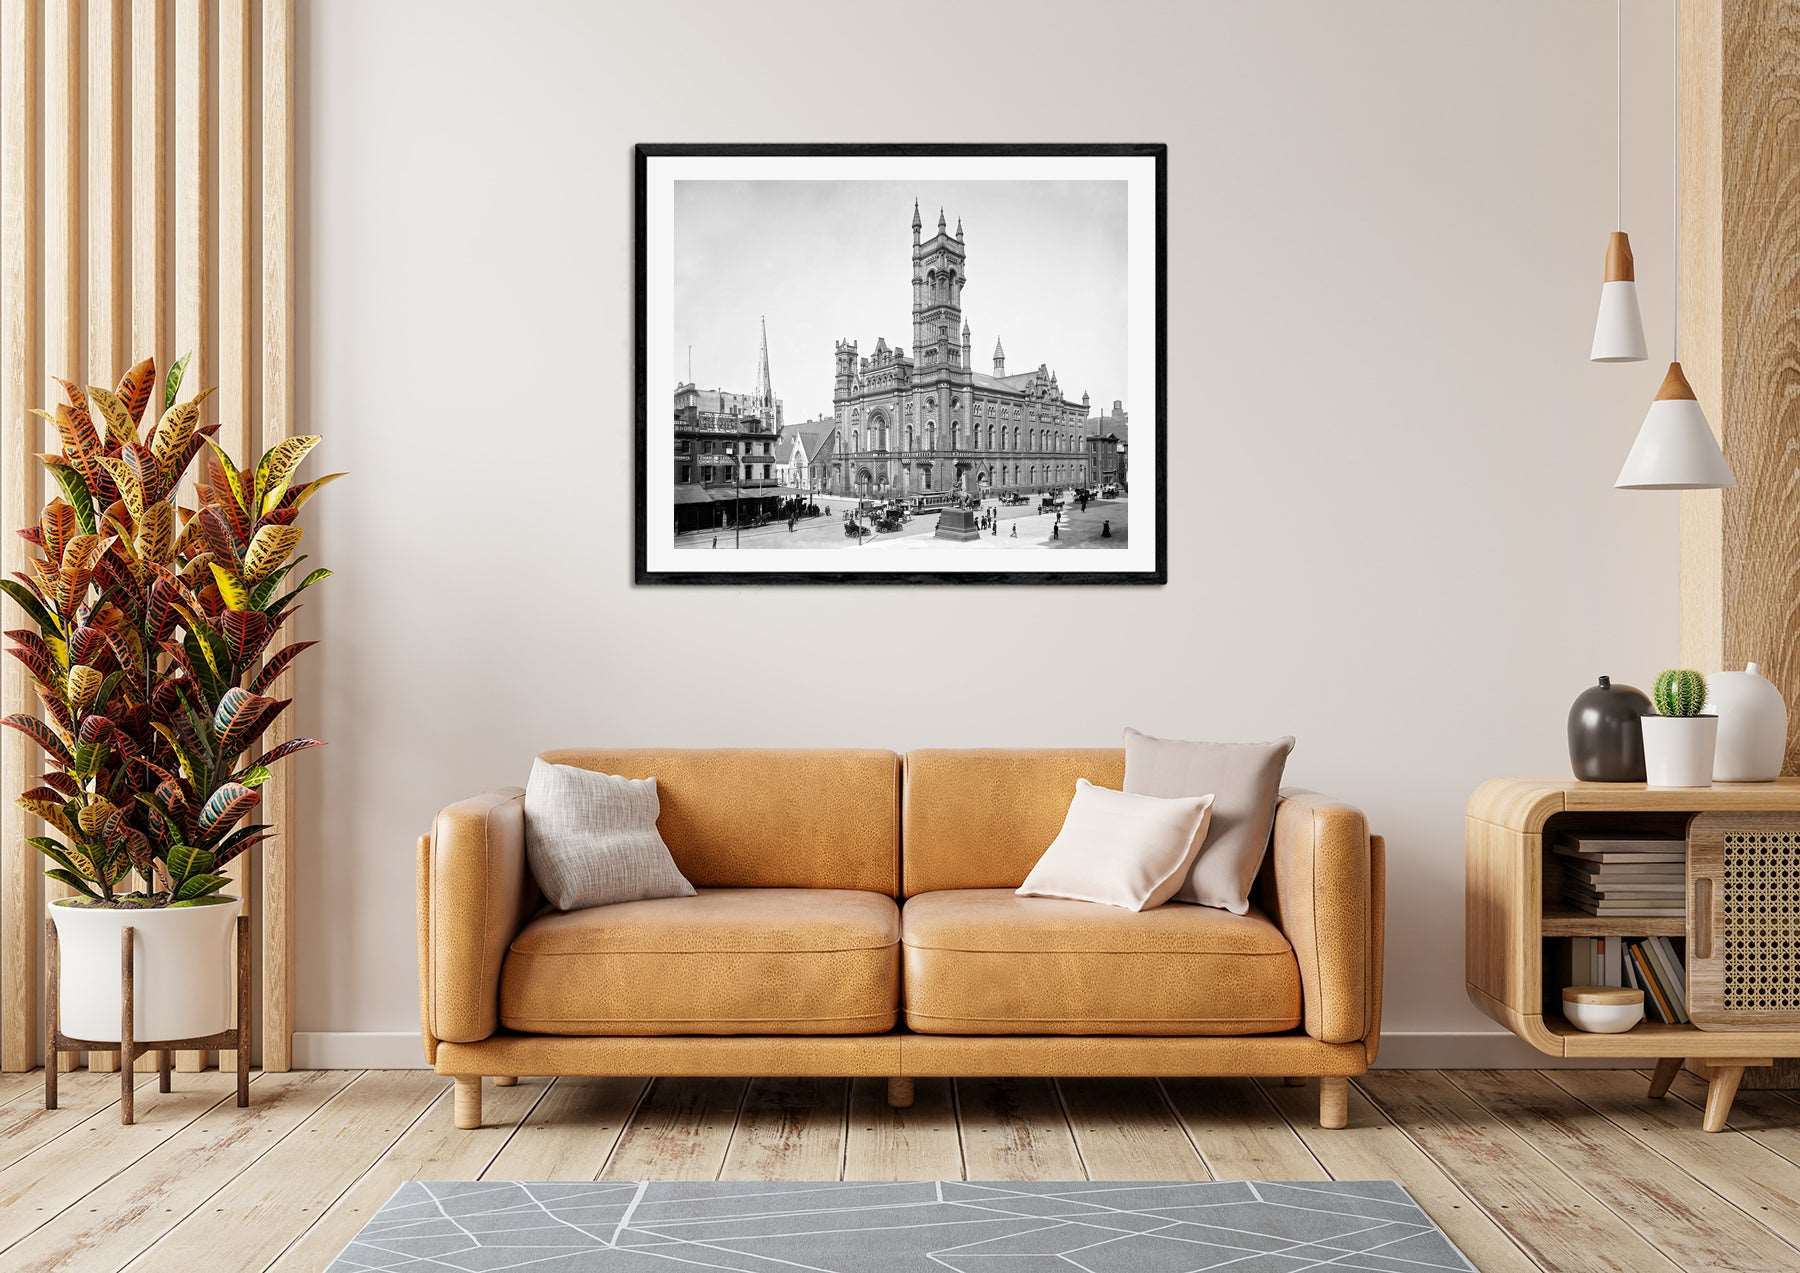 A framed print reproction of a vintage Philadelphia photograph hanging above a yellow couch